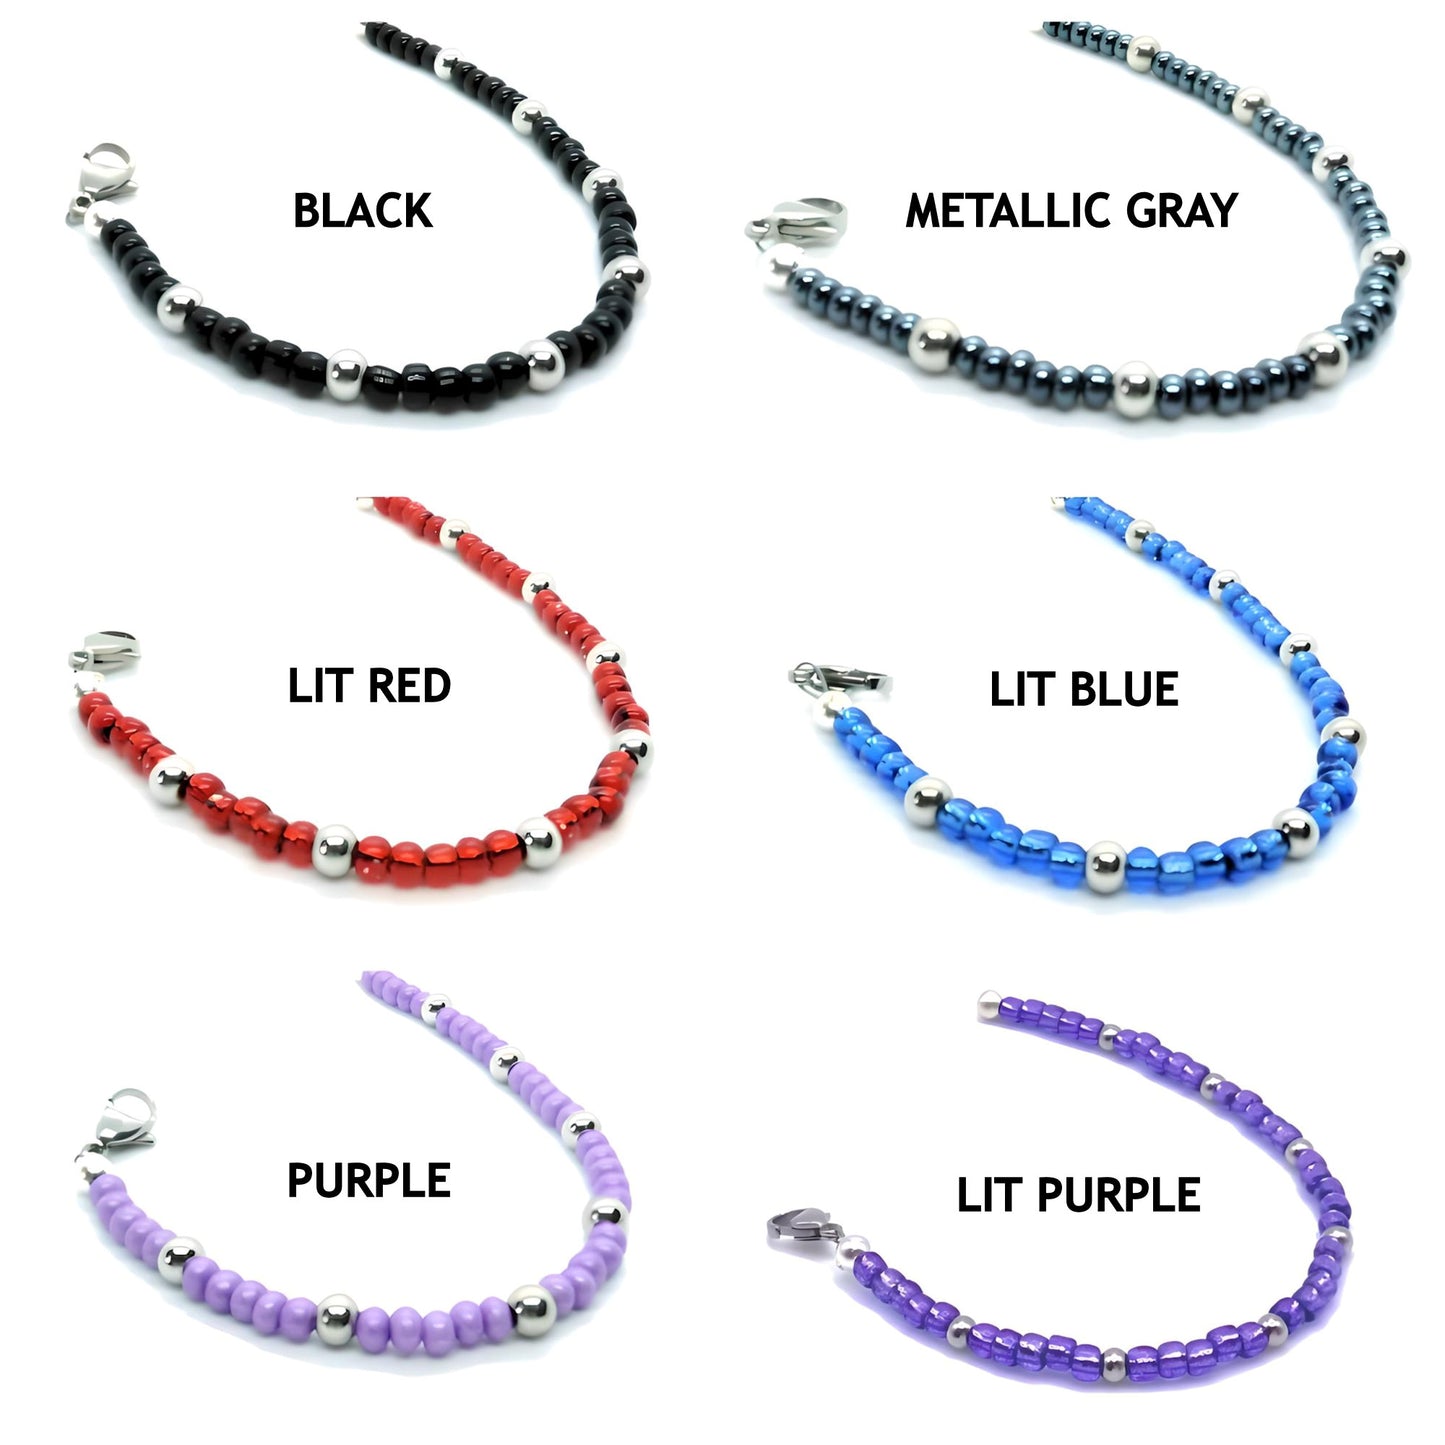 Hotwife Anklet / Bracelet with Clear Glass Charm